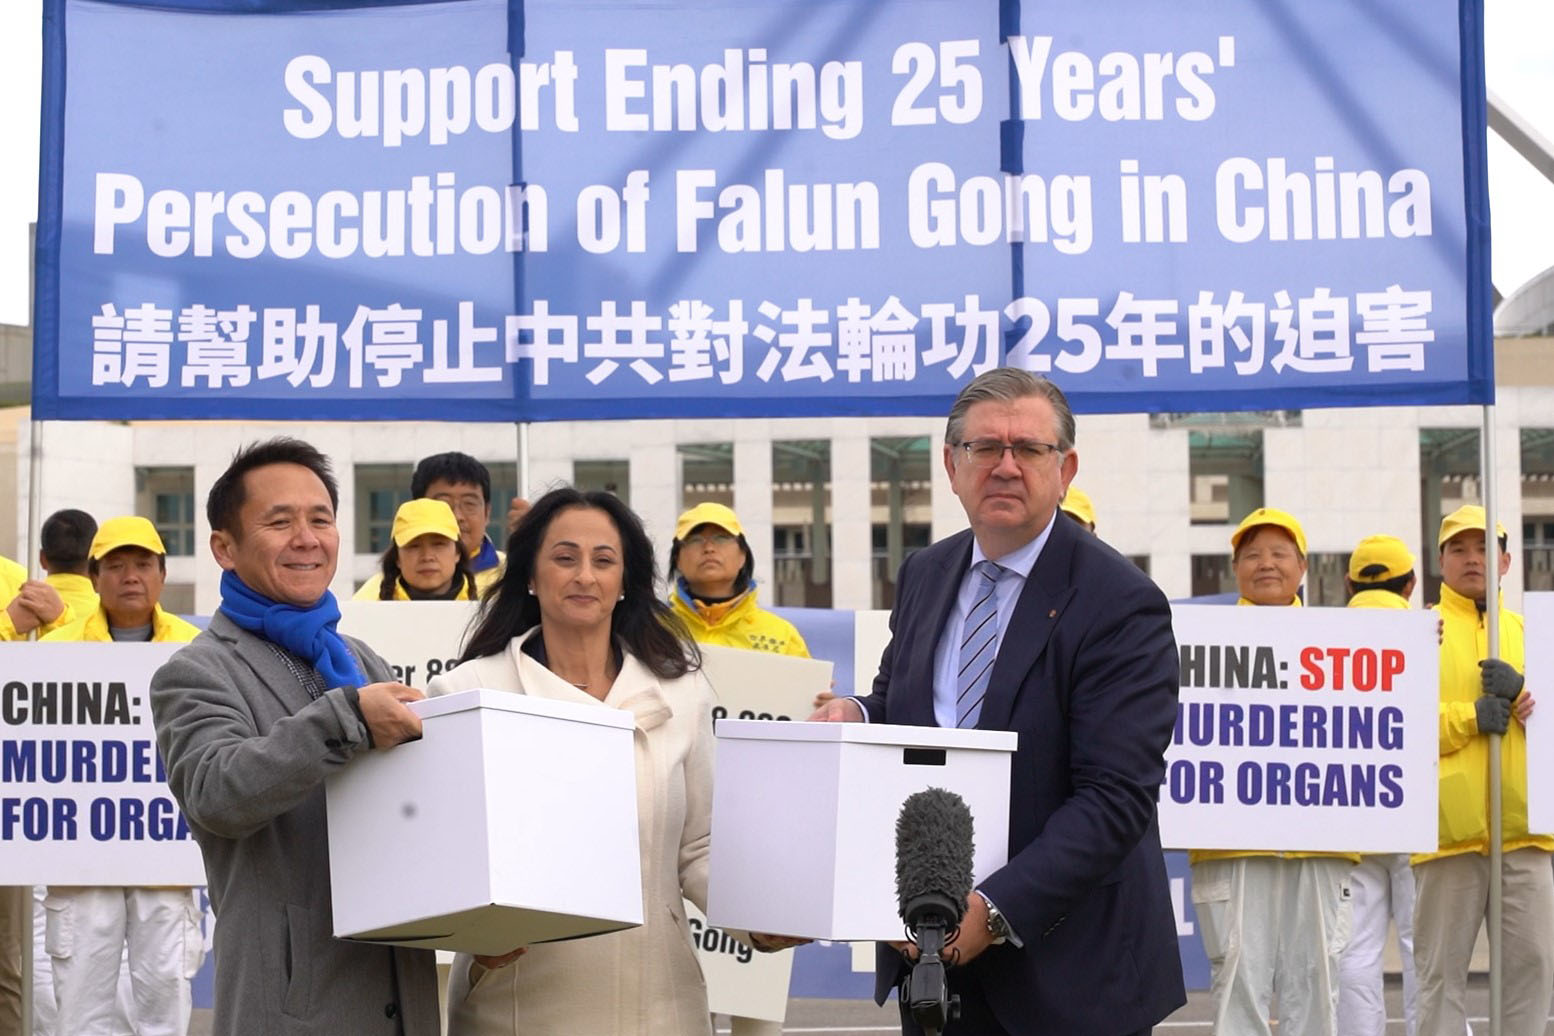 Image for article Australia: 26 Organizations Jointly Sign Letter Urging Government to Help Stop Persecution of Falun Dafa